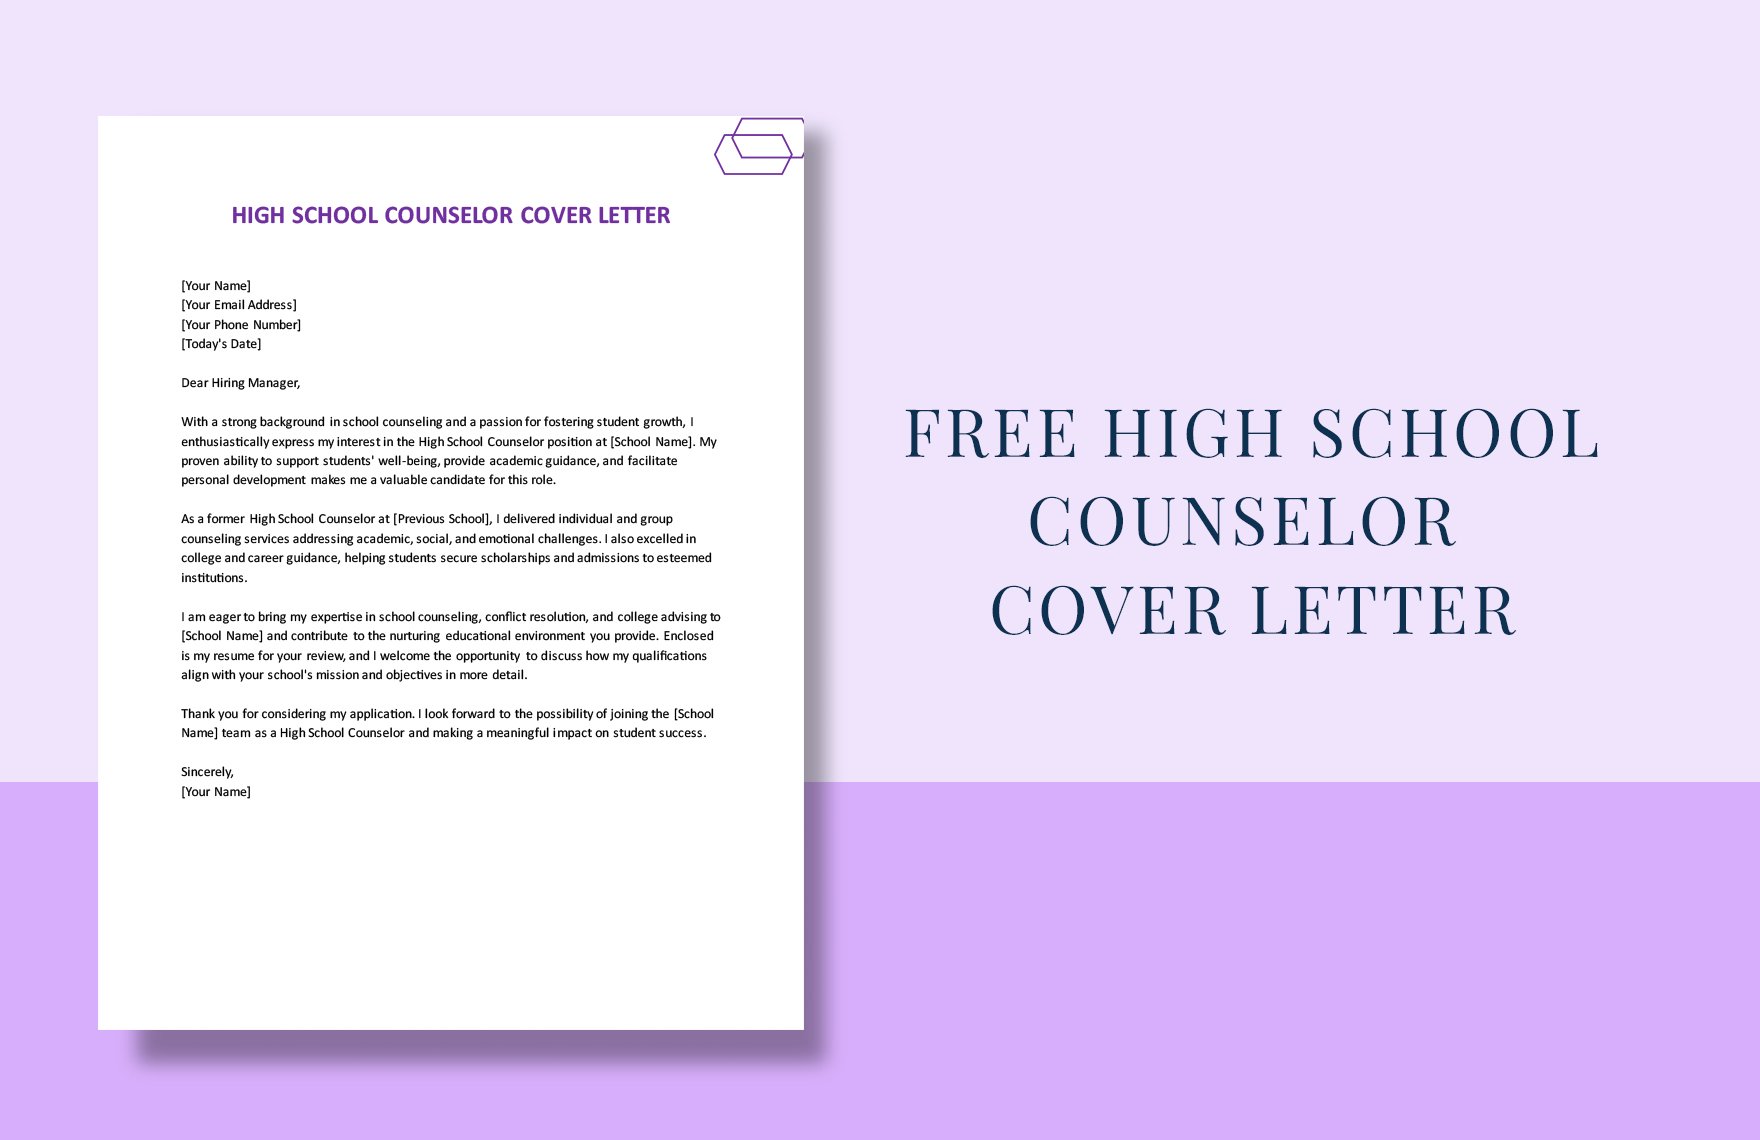 High School Counselor Cover Letter